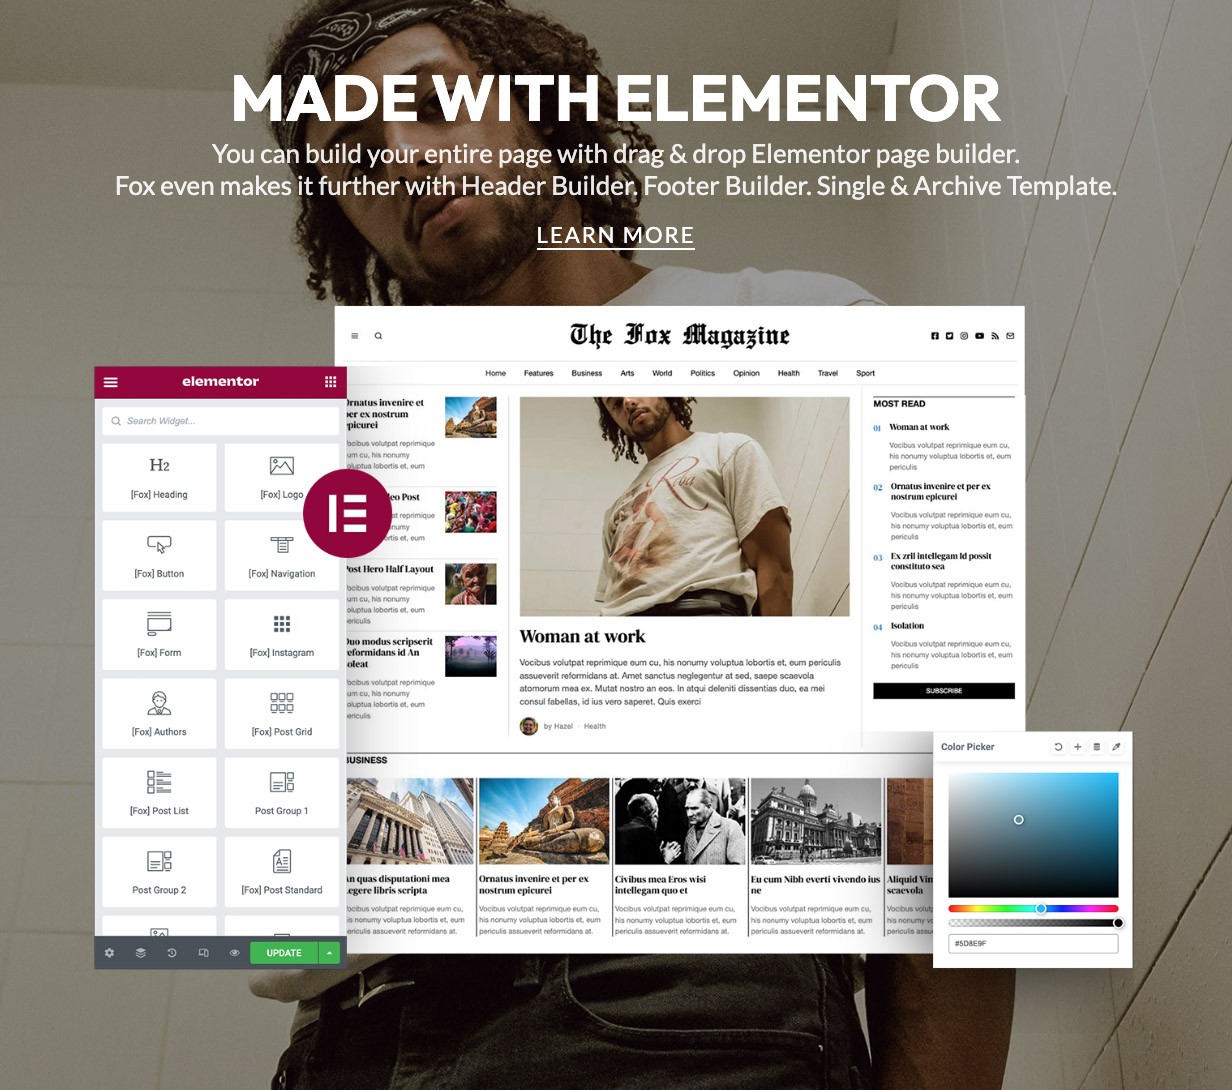 The Fox Elementor Page Builder